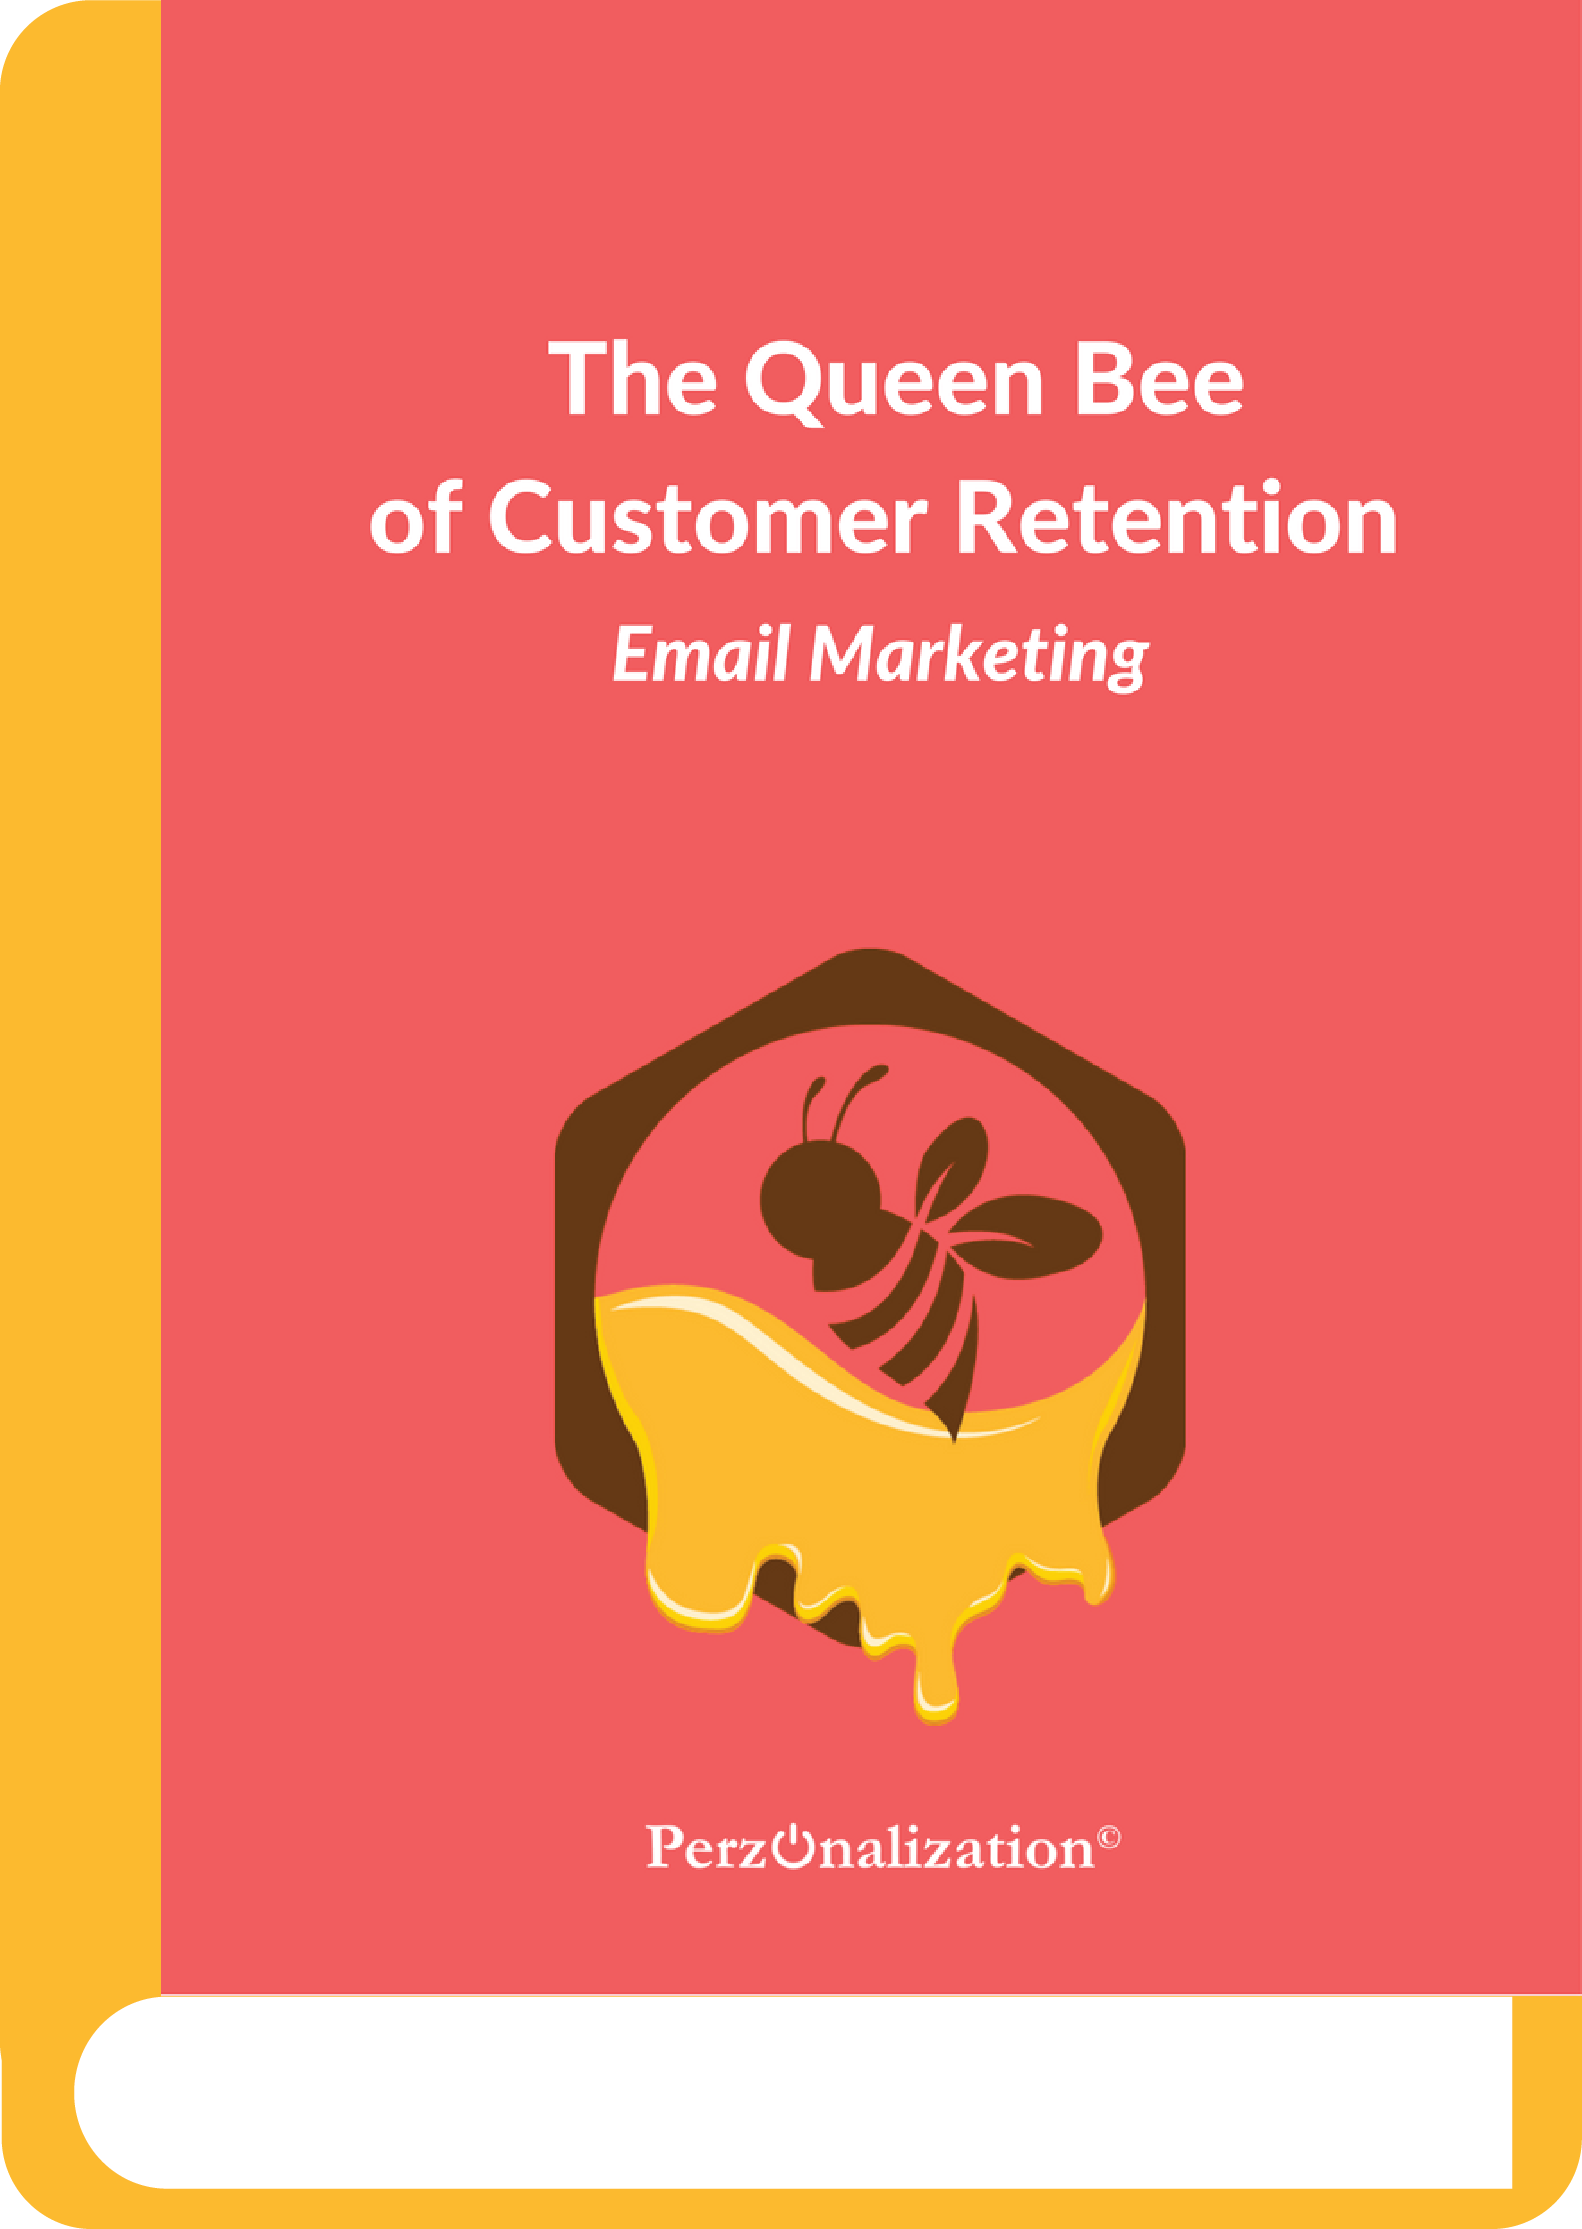 Did you know that 80% of businesses rely on email marketing to retain customers? Coupled with AI powered personalization, it can ensure customer retention.